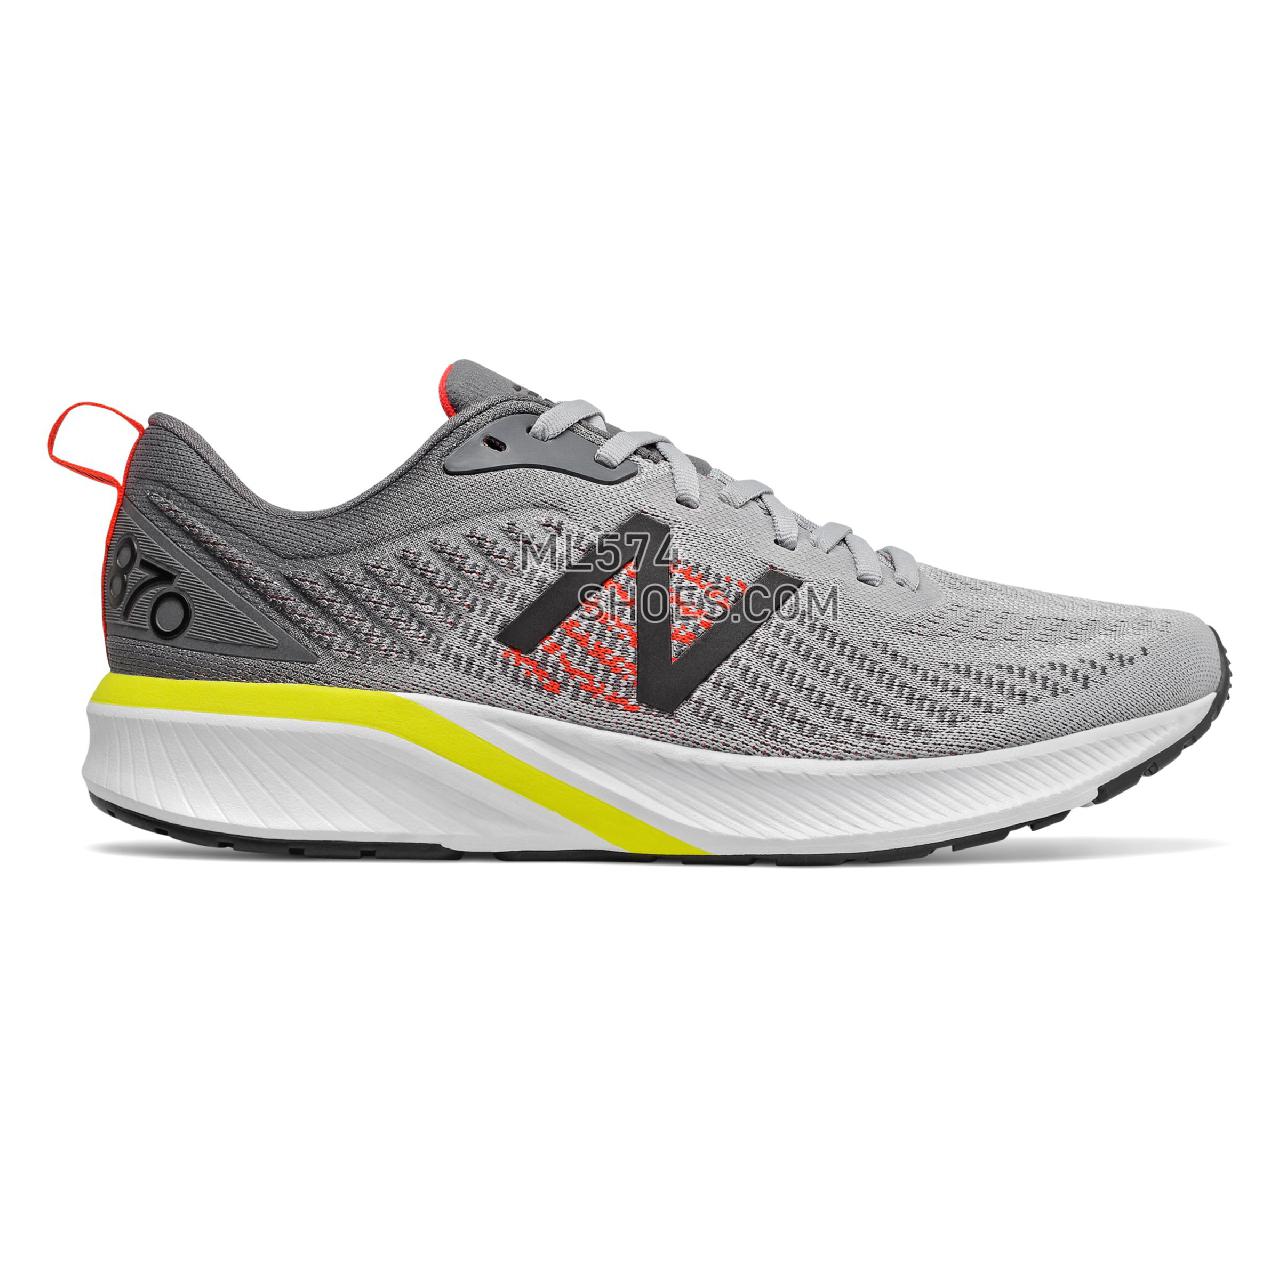 New Balance 870v5 - Men's Stability Running - Silver Mink with Lead - M870GM5